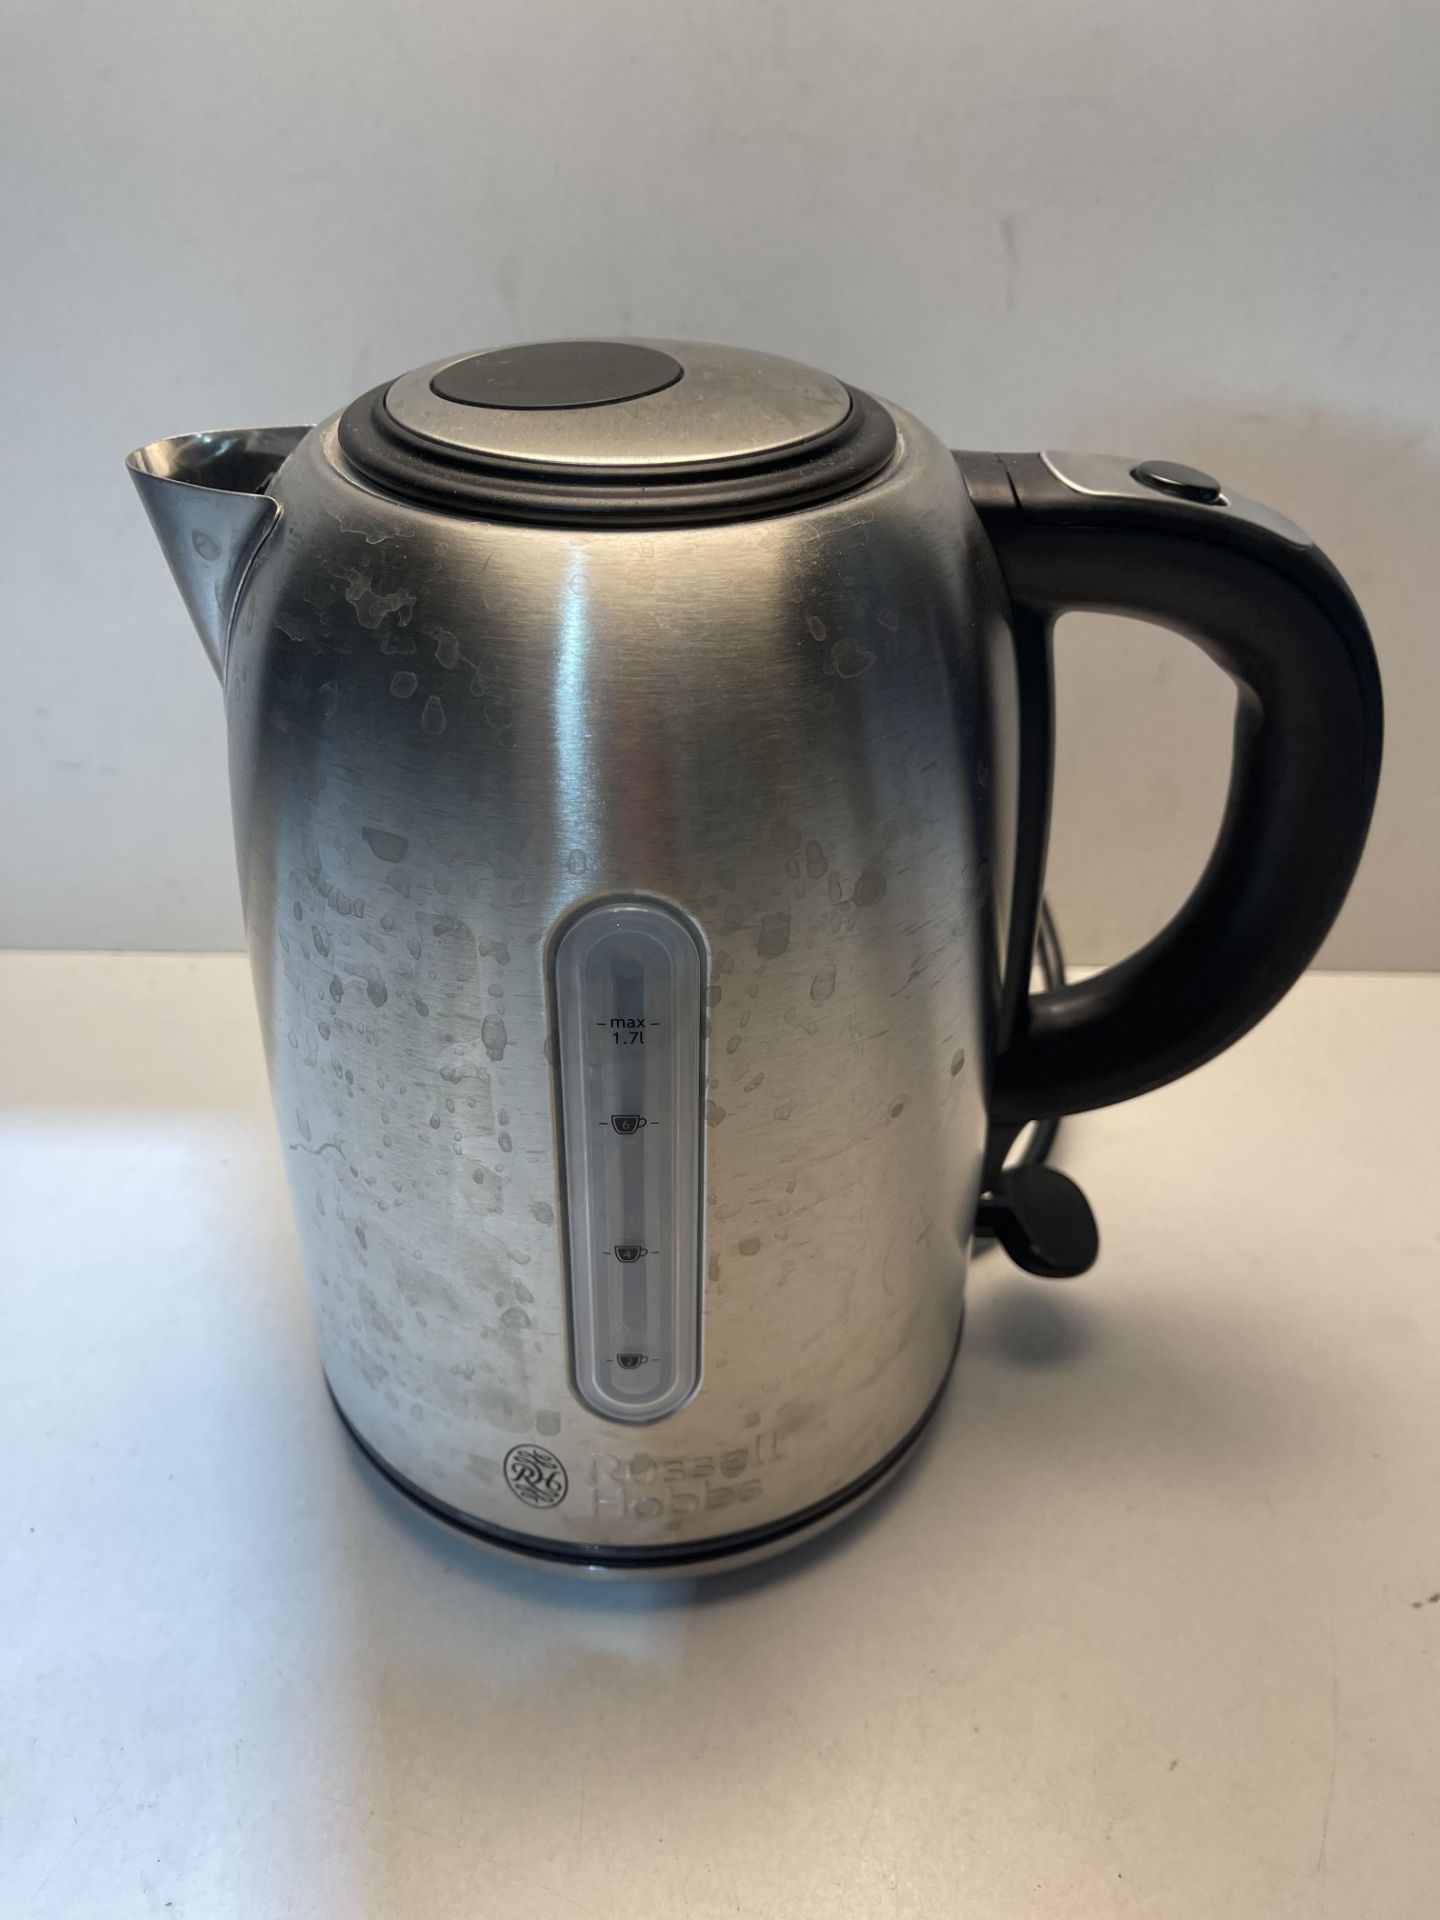 Russell Hobbs 20460 Kettle, Stainless Steel, 3000 W, 1.7 liters £32.29Condition ReportAppraisal